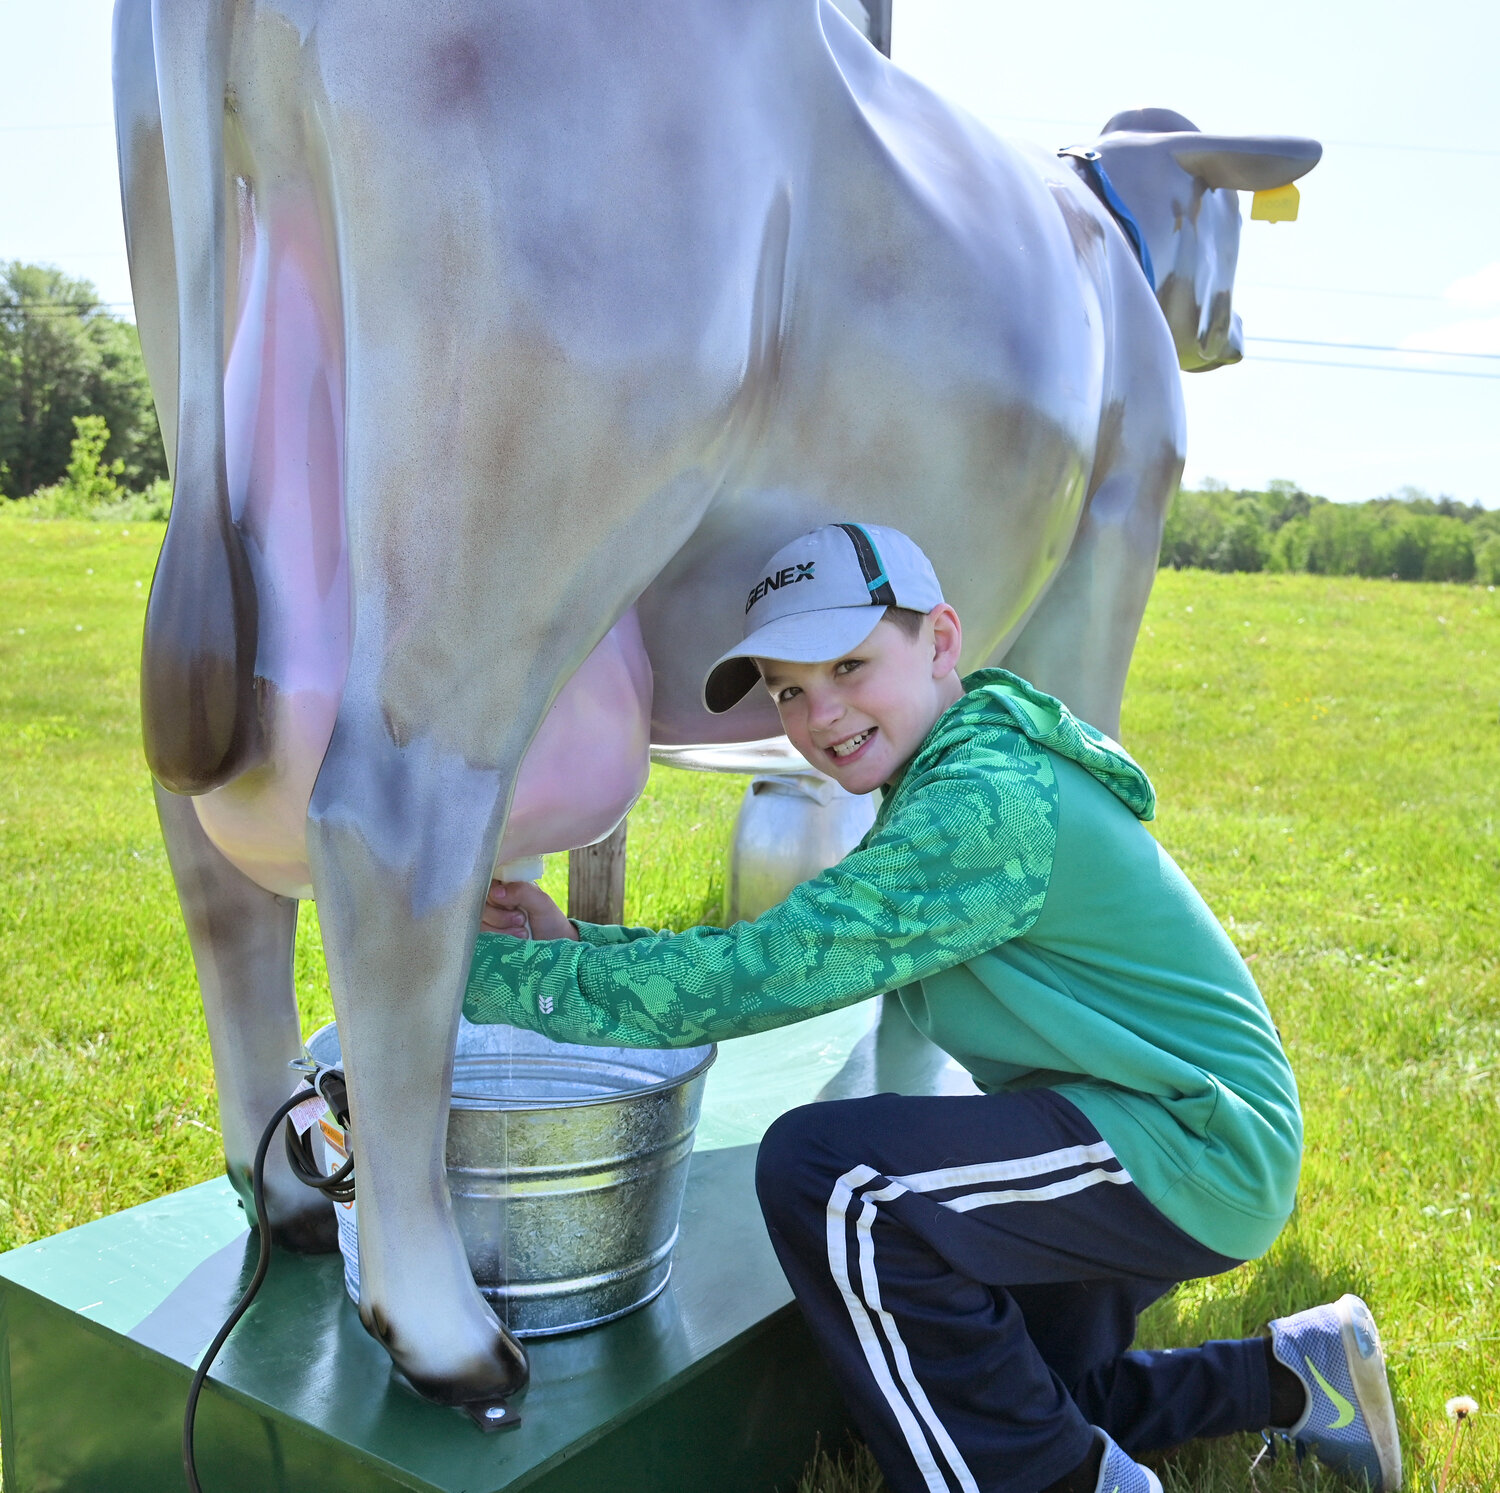 Blaise Larry, 11, son of Priscilla and Doug Larry, “milks” the interactive cow that will be making the rounds this spring and summer in Oneida County, including an appearance at Farm Fest, 4:30 to 8 p.m. on Friday, June 2, at DiNitto Farms, 6585 Benton Road.